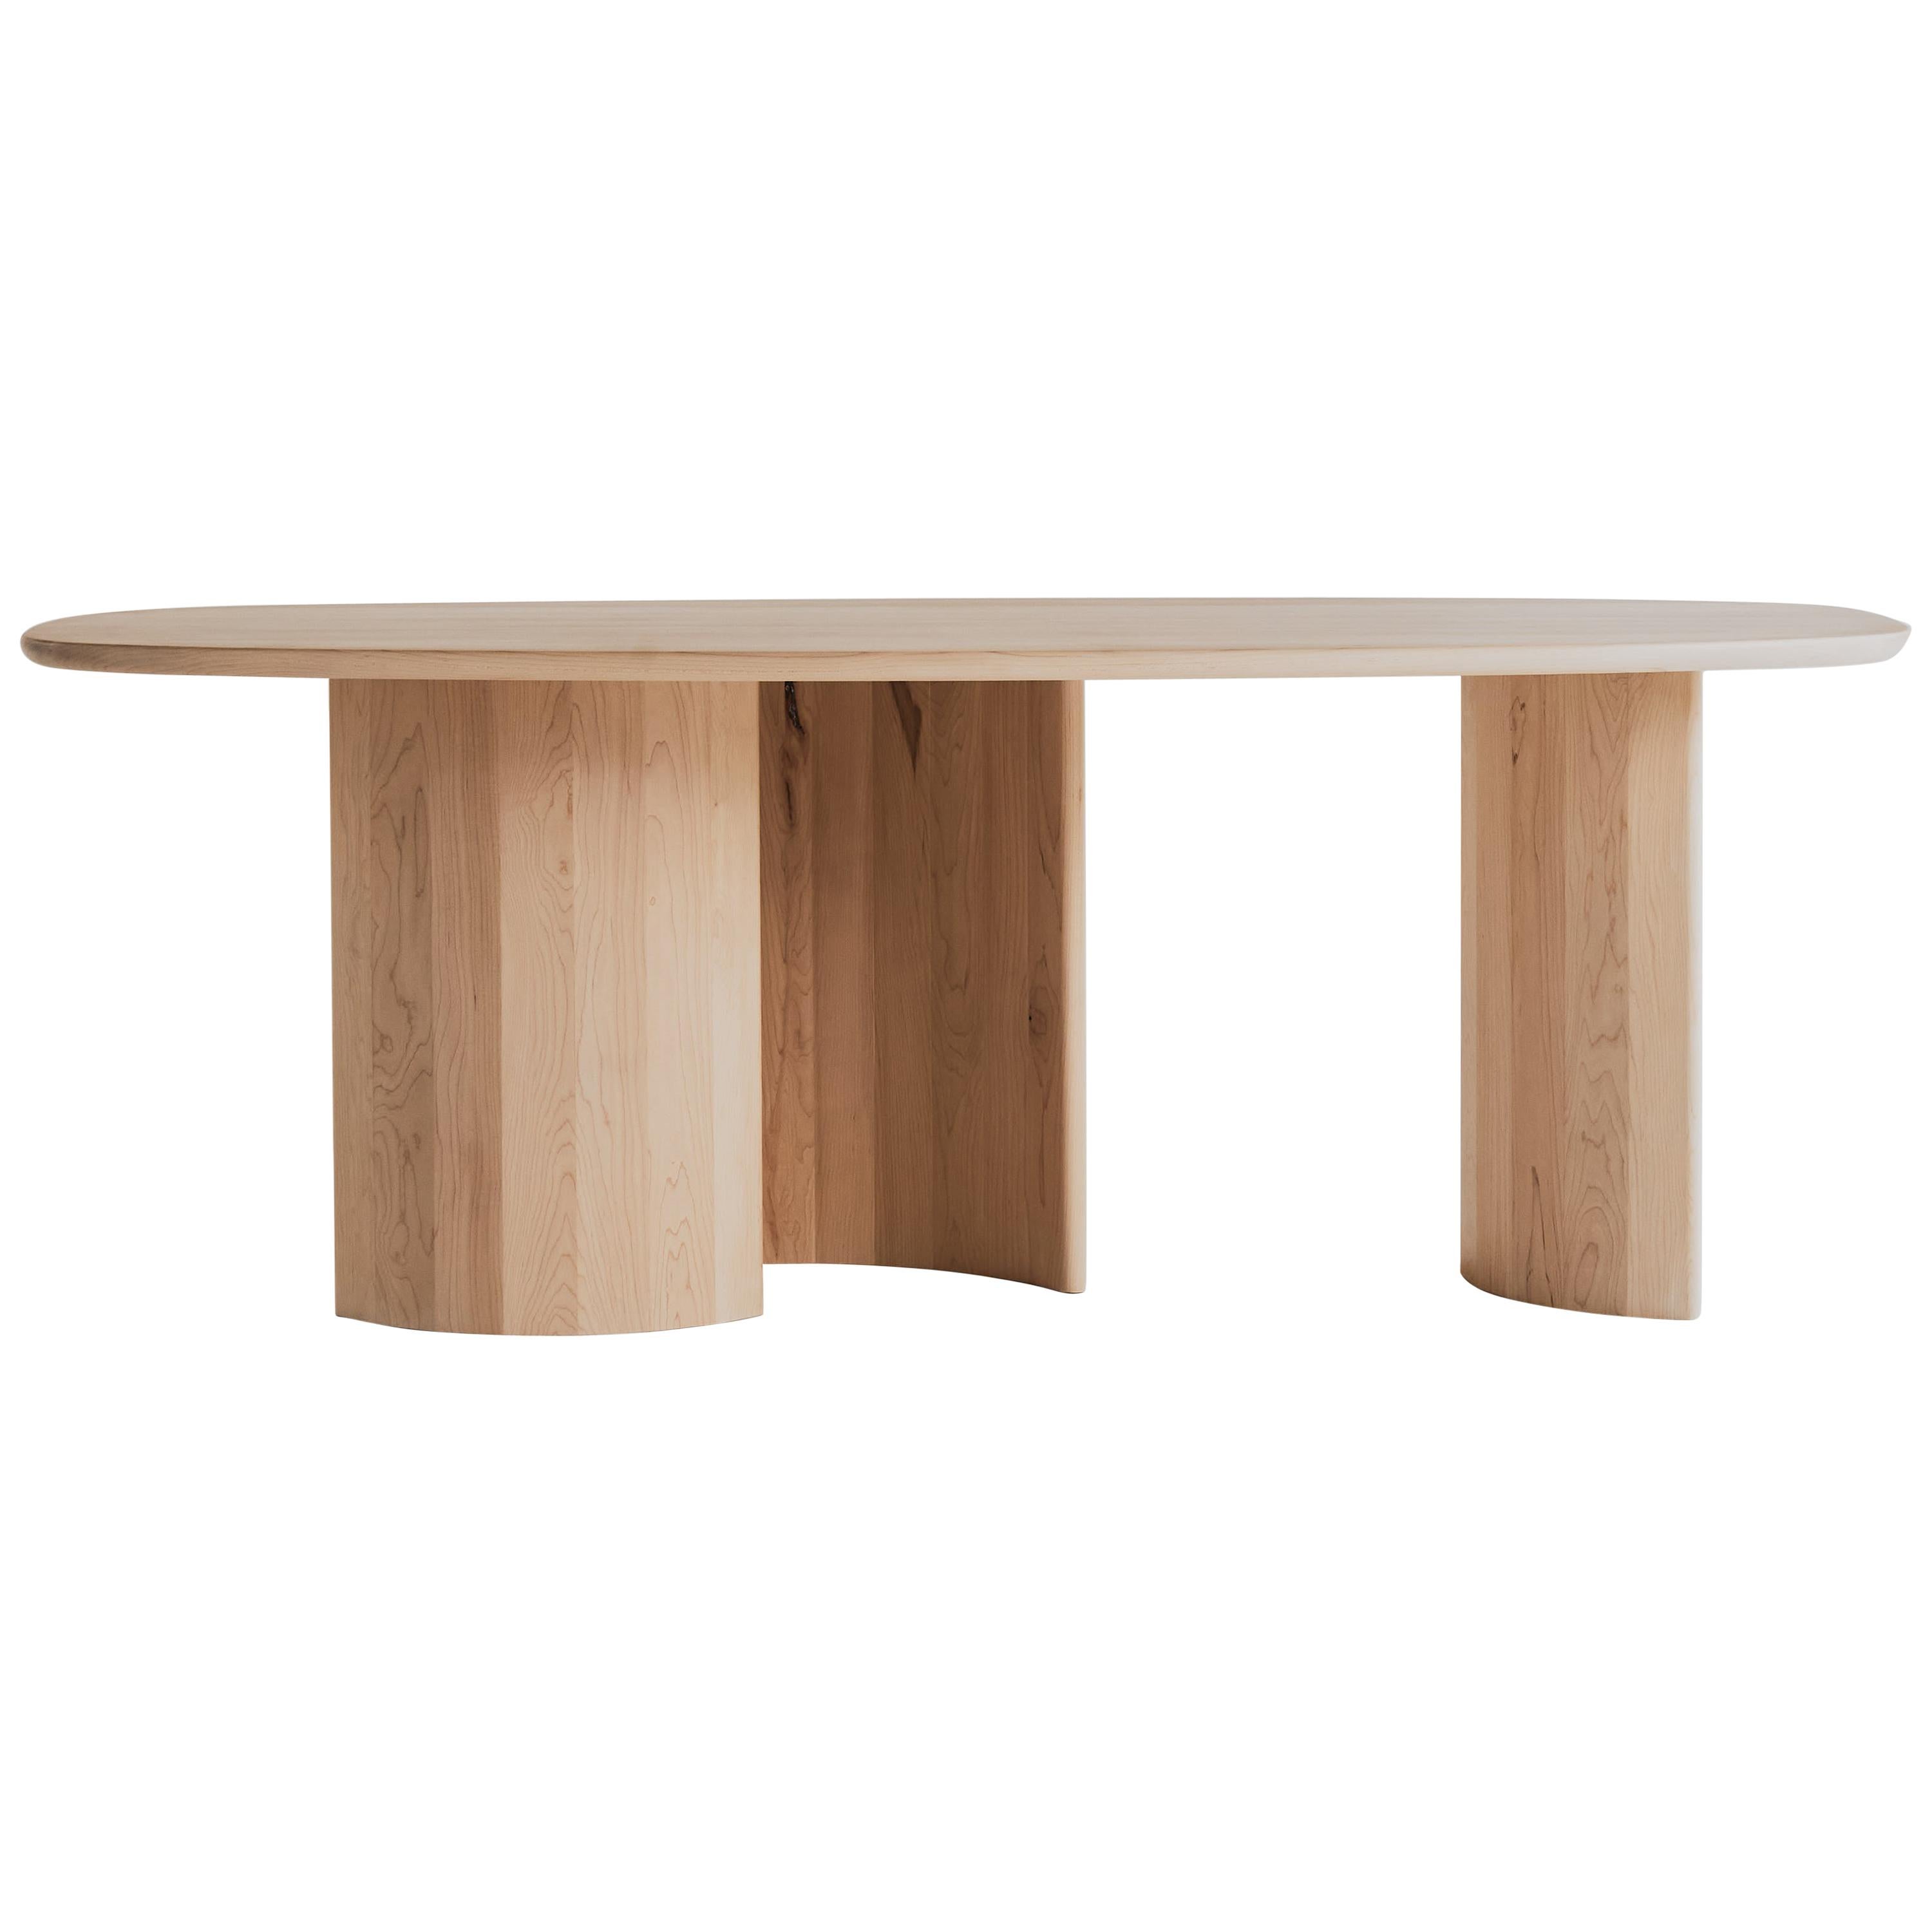 Contemporary Organic Sculptural Maple Wood Dining Table for Richard by Campagna